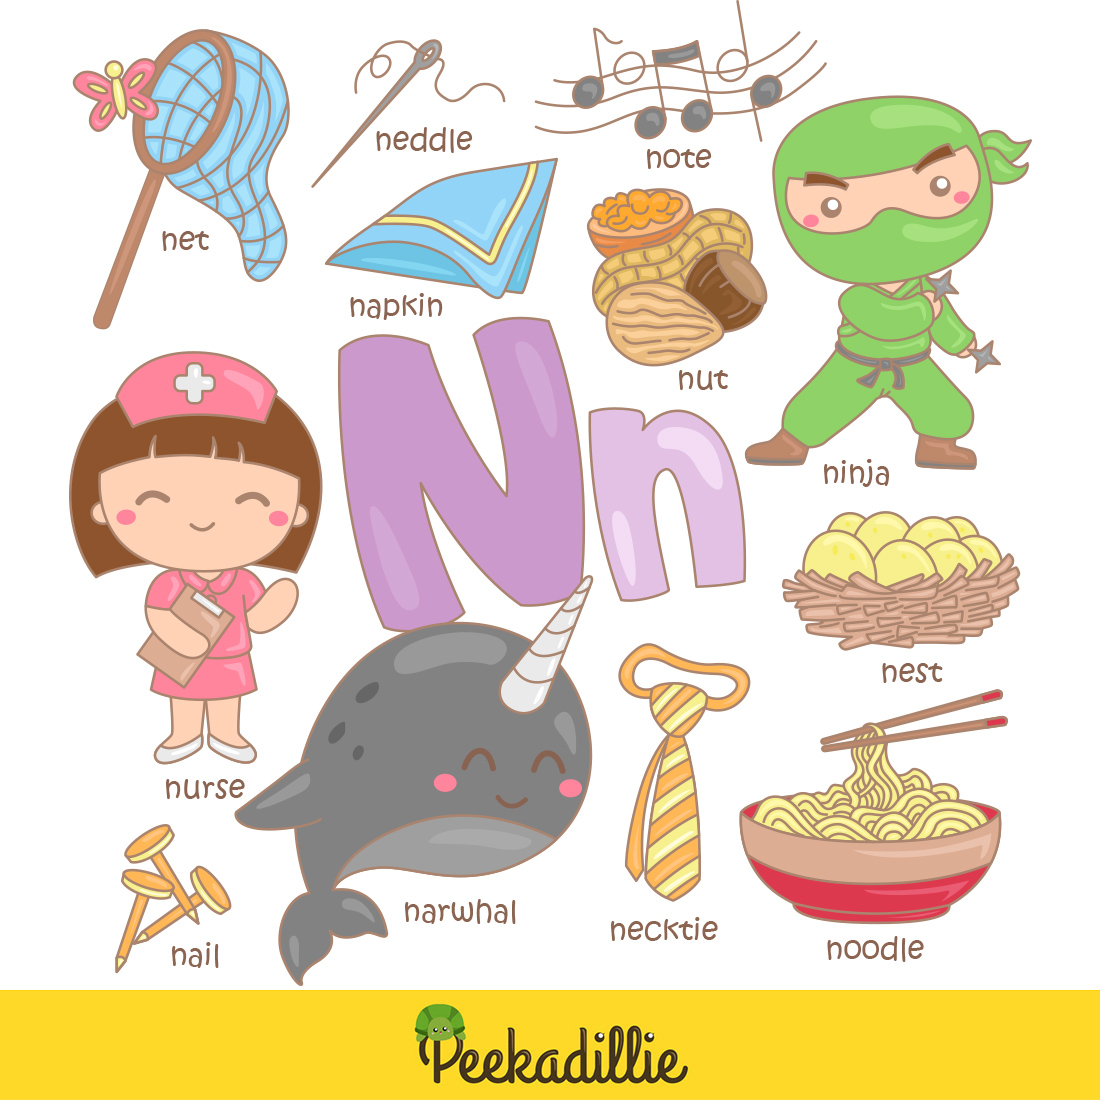 Alphabet N For Vocabulary School Letter Reading Writing Font Study Learning Student Toodler Kids Cartoon Net Napkin Nail Nurse Narwhal Necktie Noodle Nest Ninja Nut Note Neddle Illustration Vector Clipart preview image.